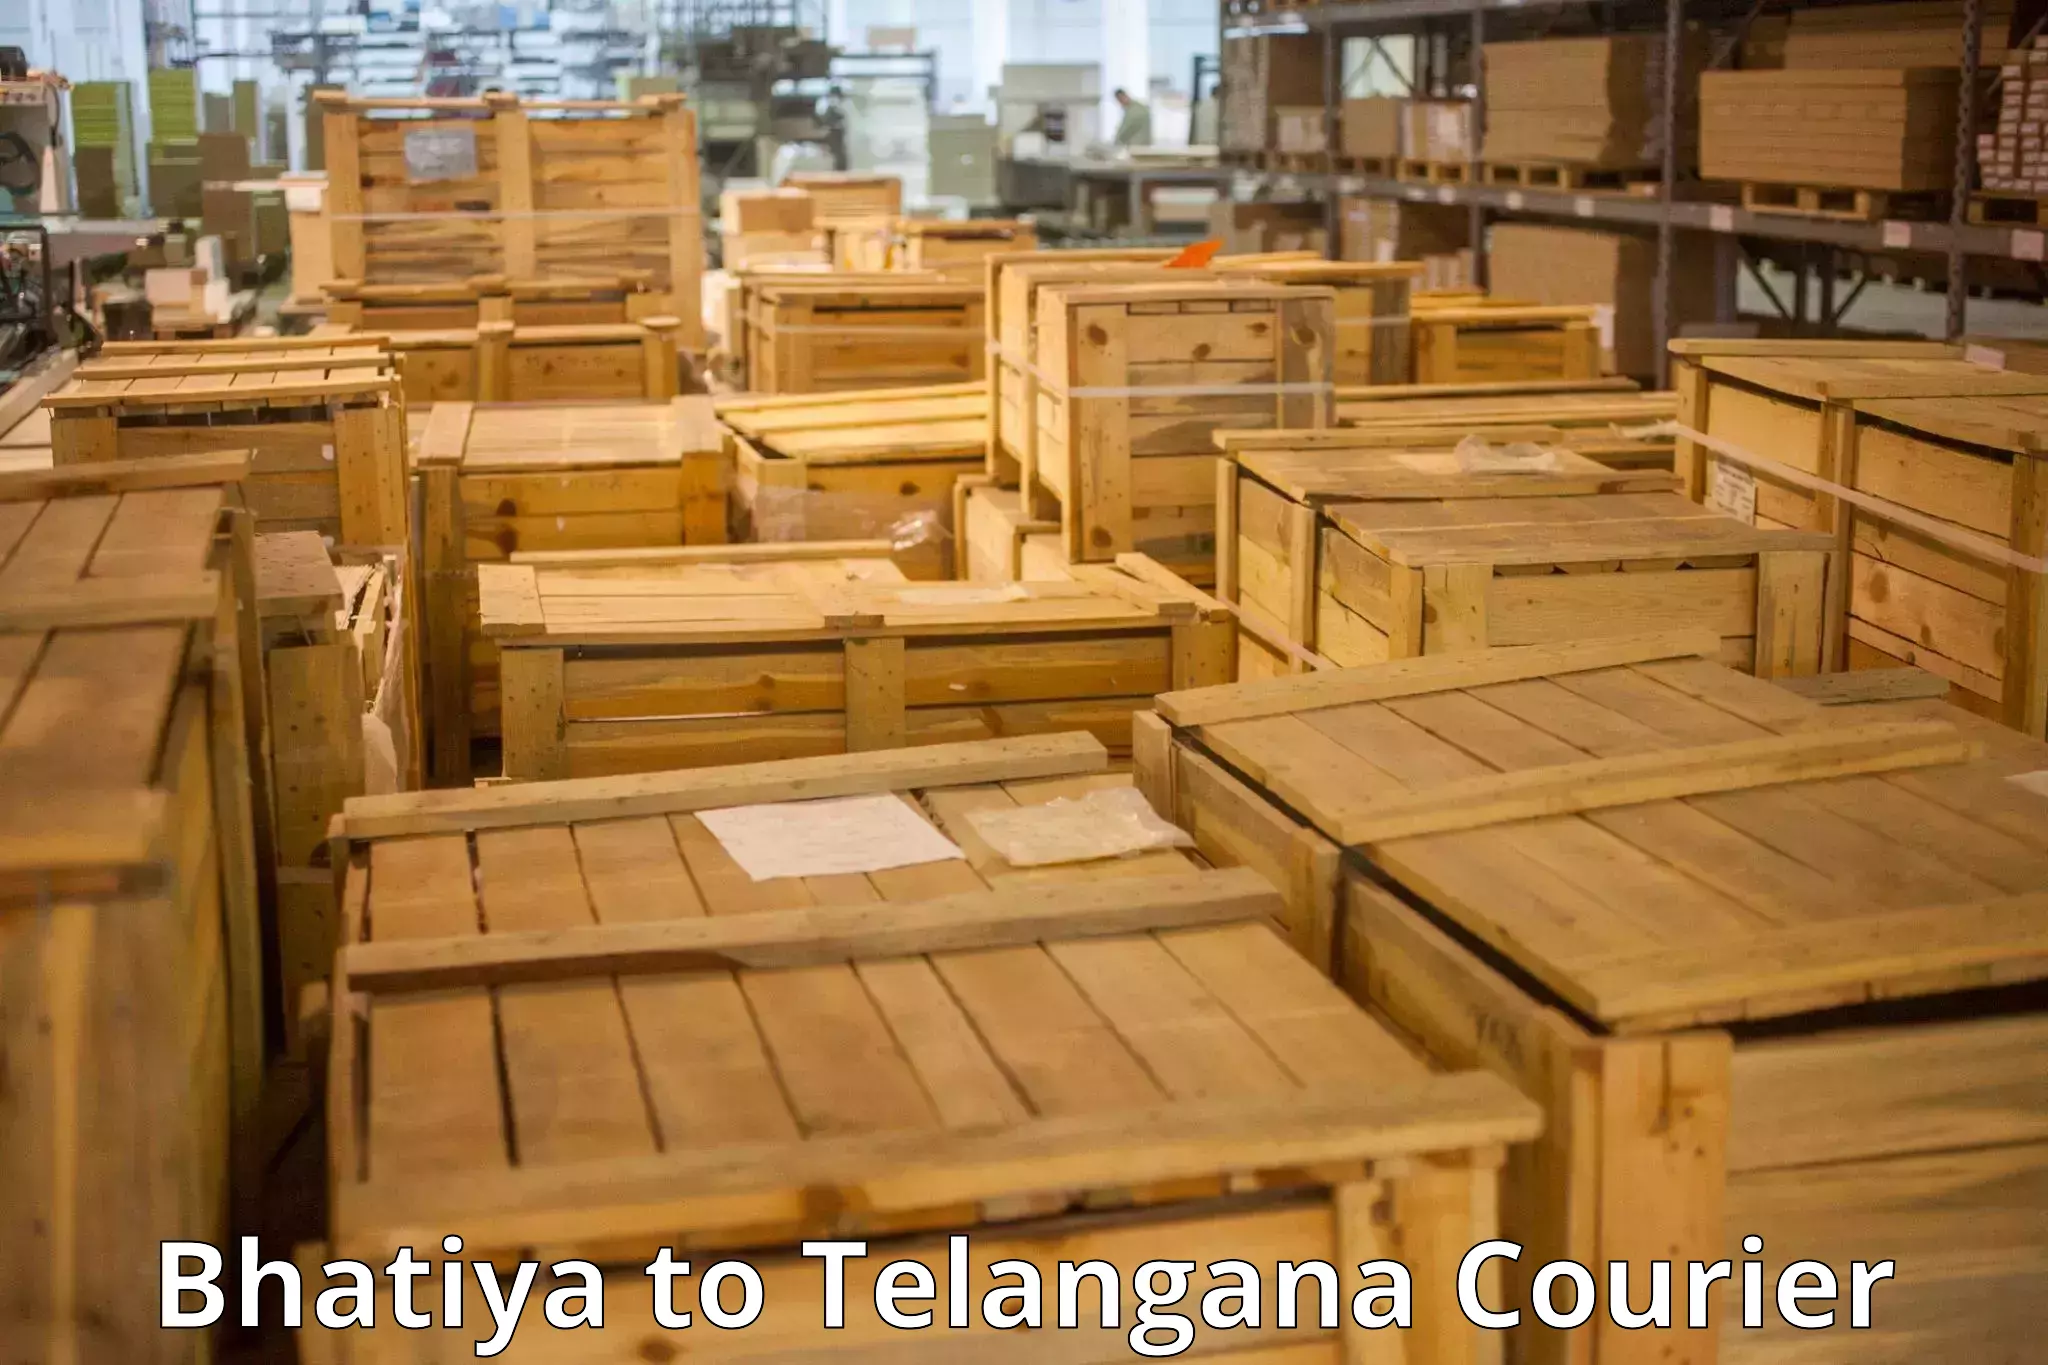 Baggage transport services in Bhatiya to Gollapalli